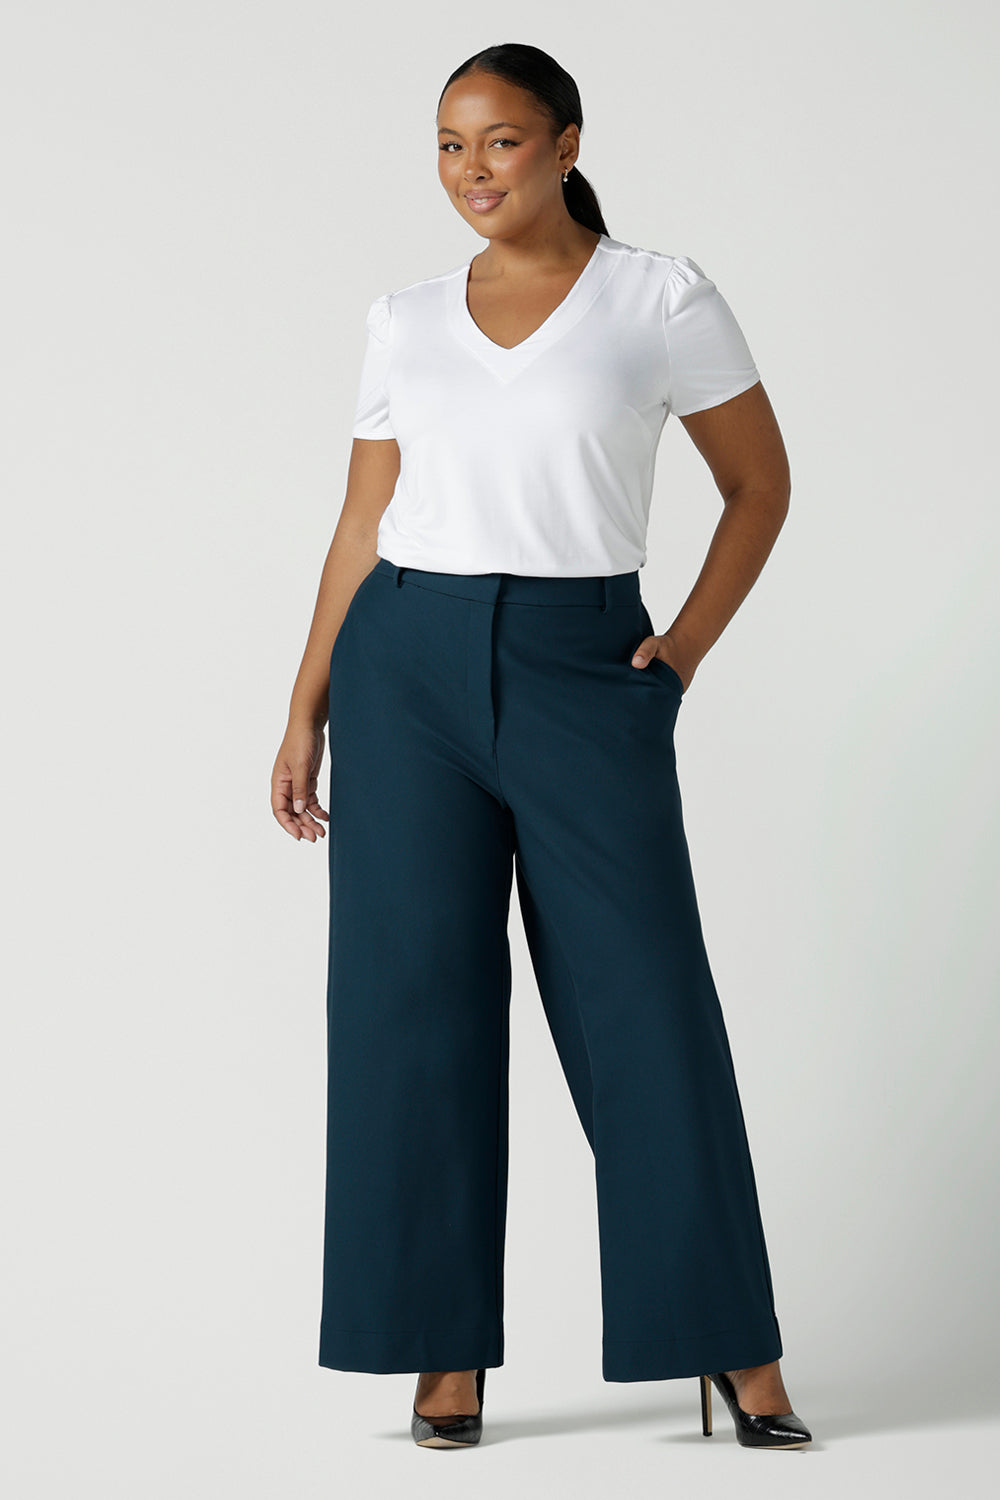 Size 16 woman wears the Yael pant in Petrol. A high waist tailored pant with tailoring elements like side pockets, zip front and belt loops. Full length wide leg pant suitable for comfortable workwear with a statement Petrol colour. Styled back with white Evan top in white bamboo. Made in Australia for women size 8 - 24.